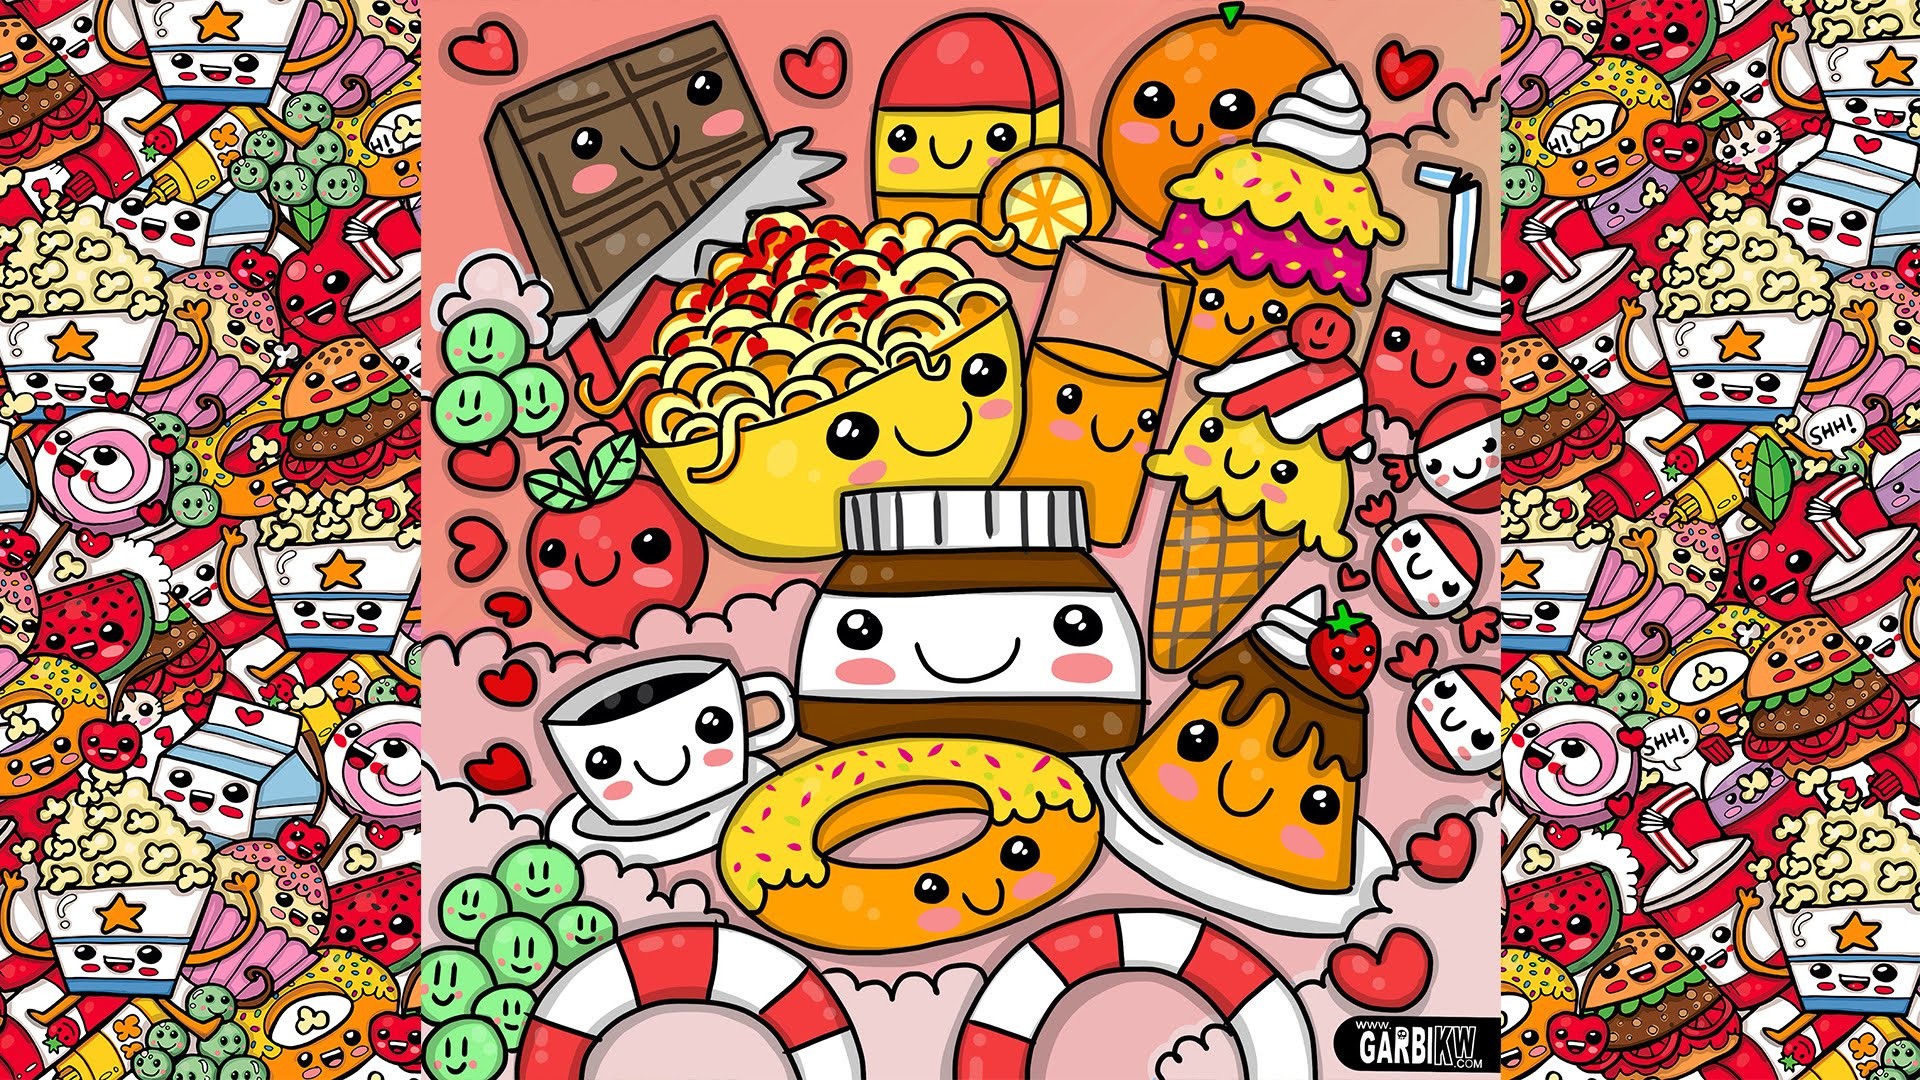 How To Draw Party Kawaii Food by Garbi KW Pictures For DesktopWallpaper PicturesCute